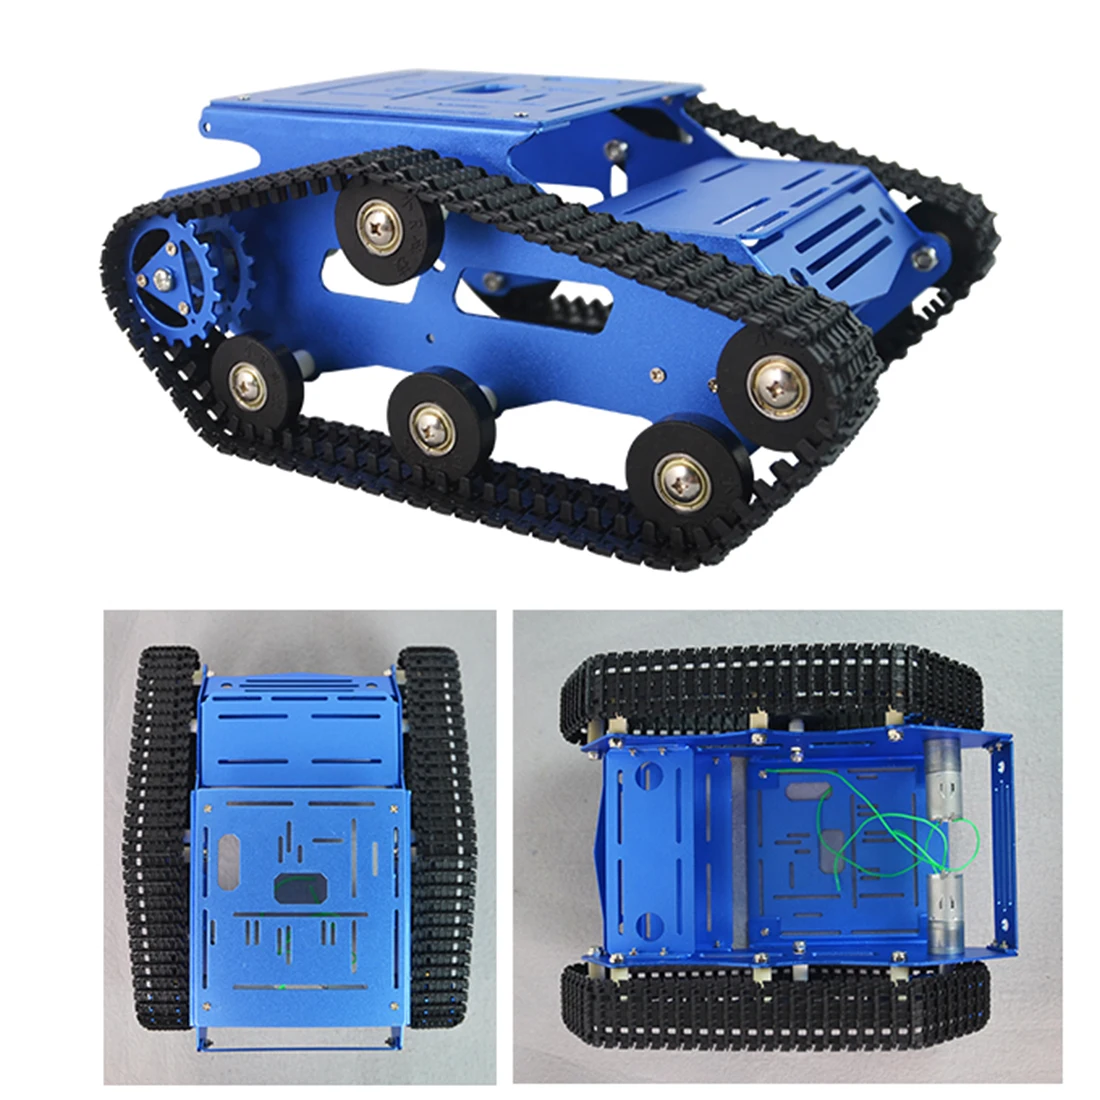 Surwish DIY Smart Robot Tank Crawler Chassis Car Frame Kit Programmable Toys For Kids Adults Christmas Gifts- Black Green